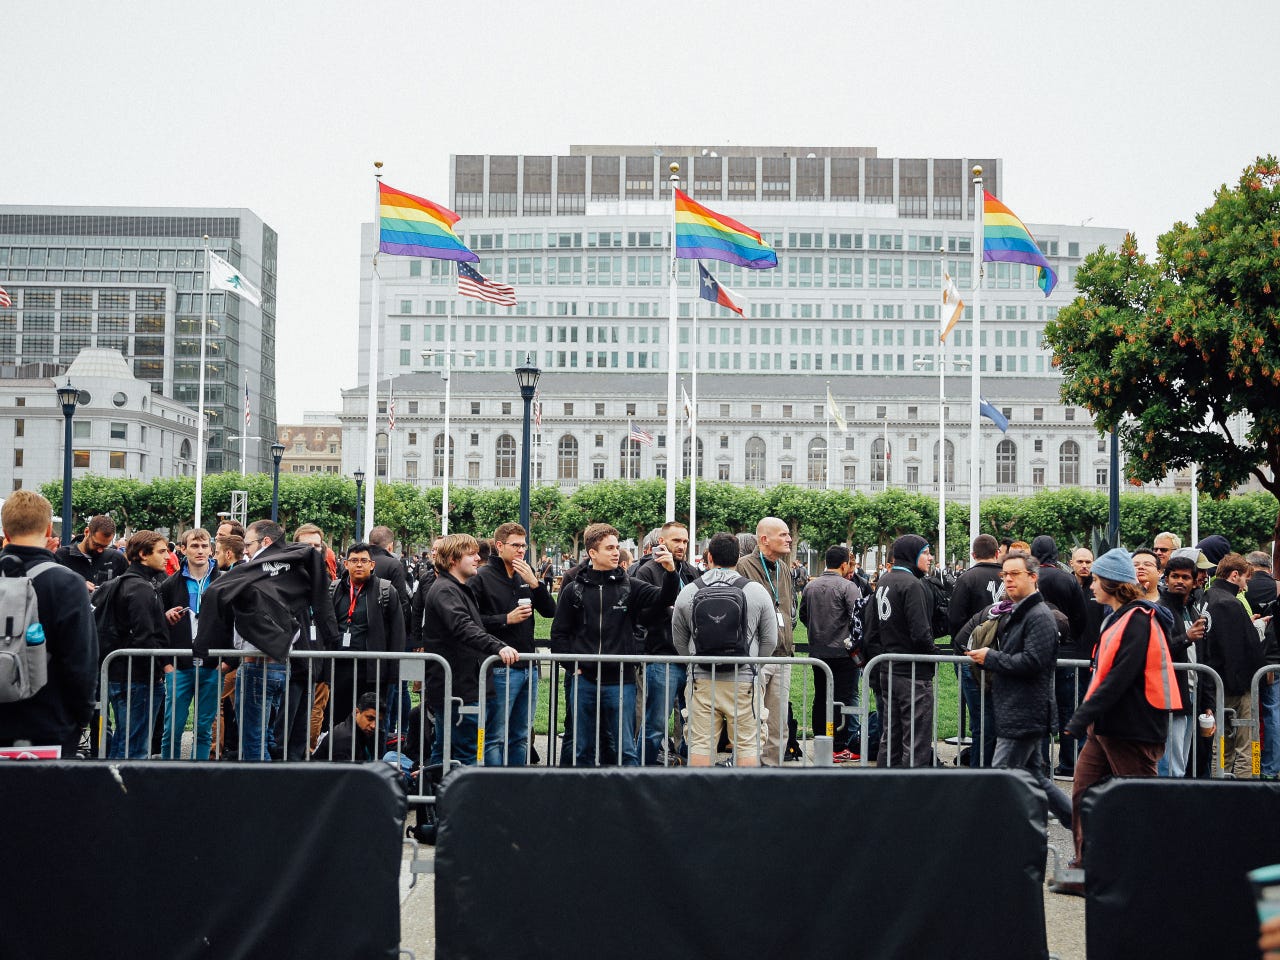 wwdc-crowd-and-exterior-8667.jpg